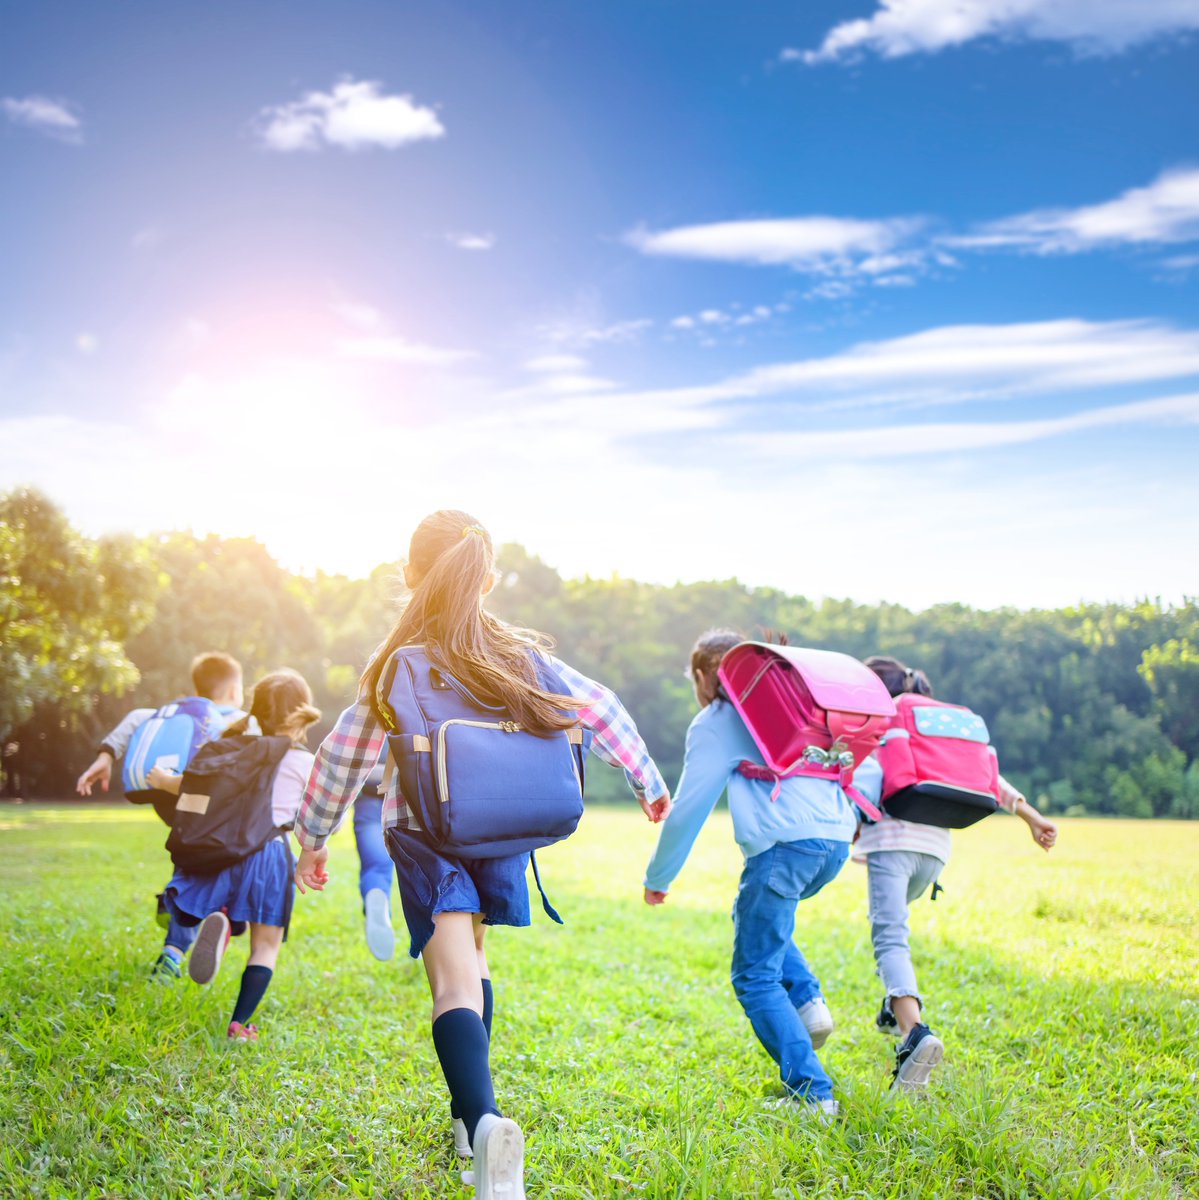 How do states, districts, and schools encourage student attendance? Check out this new blog post from @RuralED and @GranovskiyB that shares insights and learning opportunities from SEAC. bit.ly/3PbU1aM